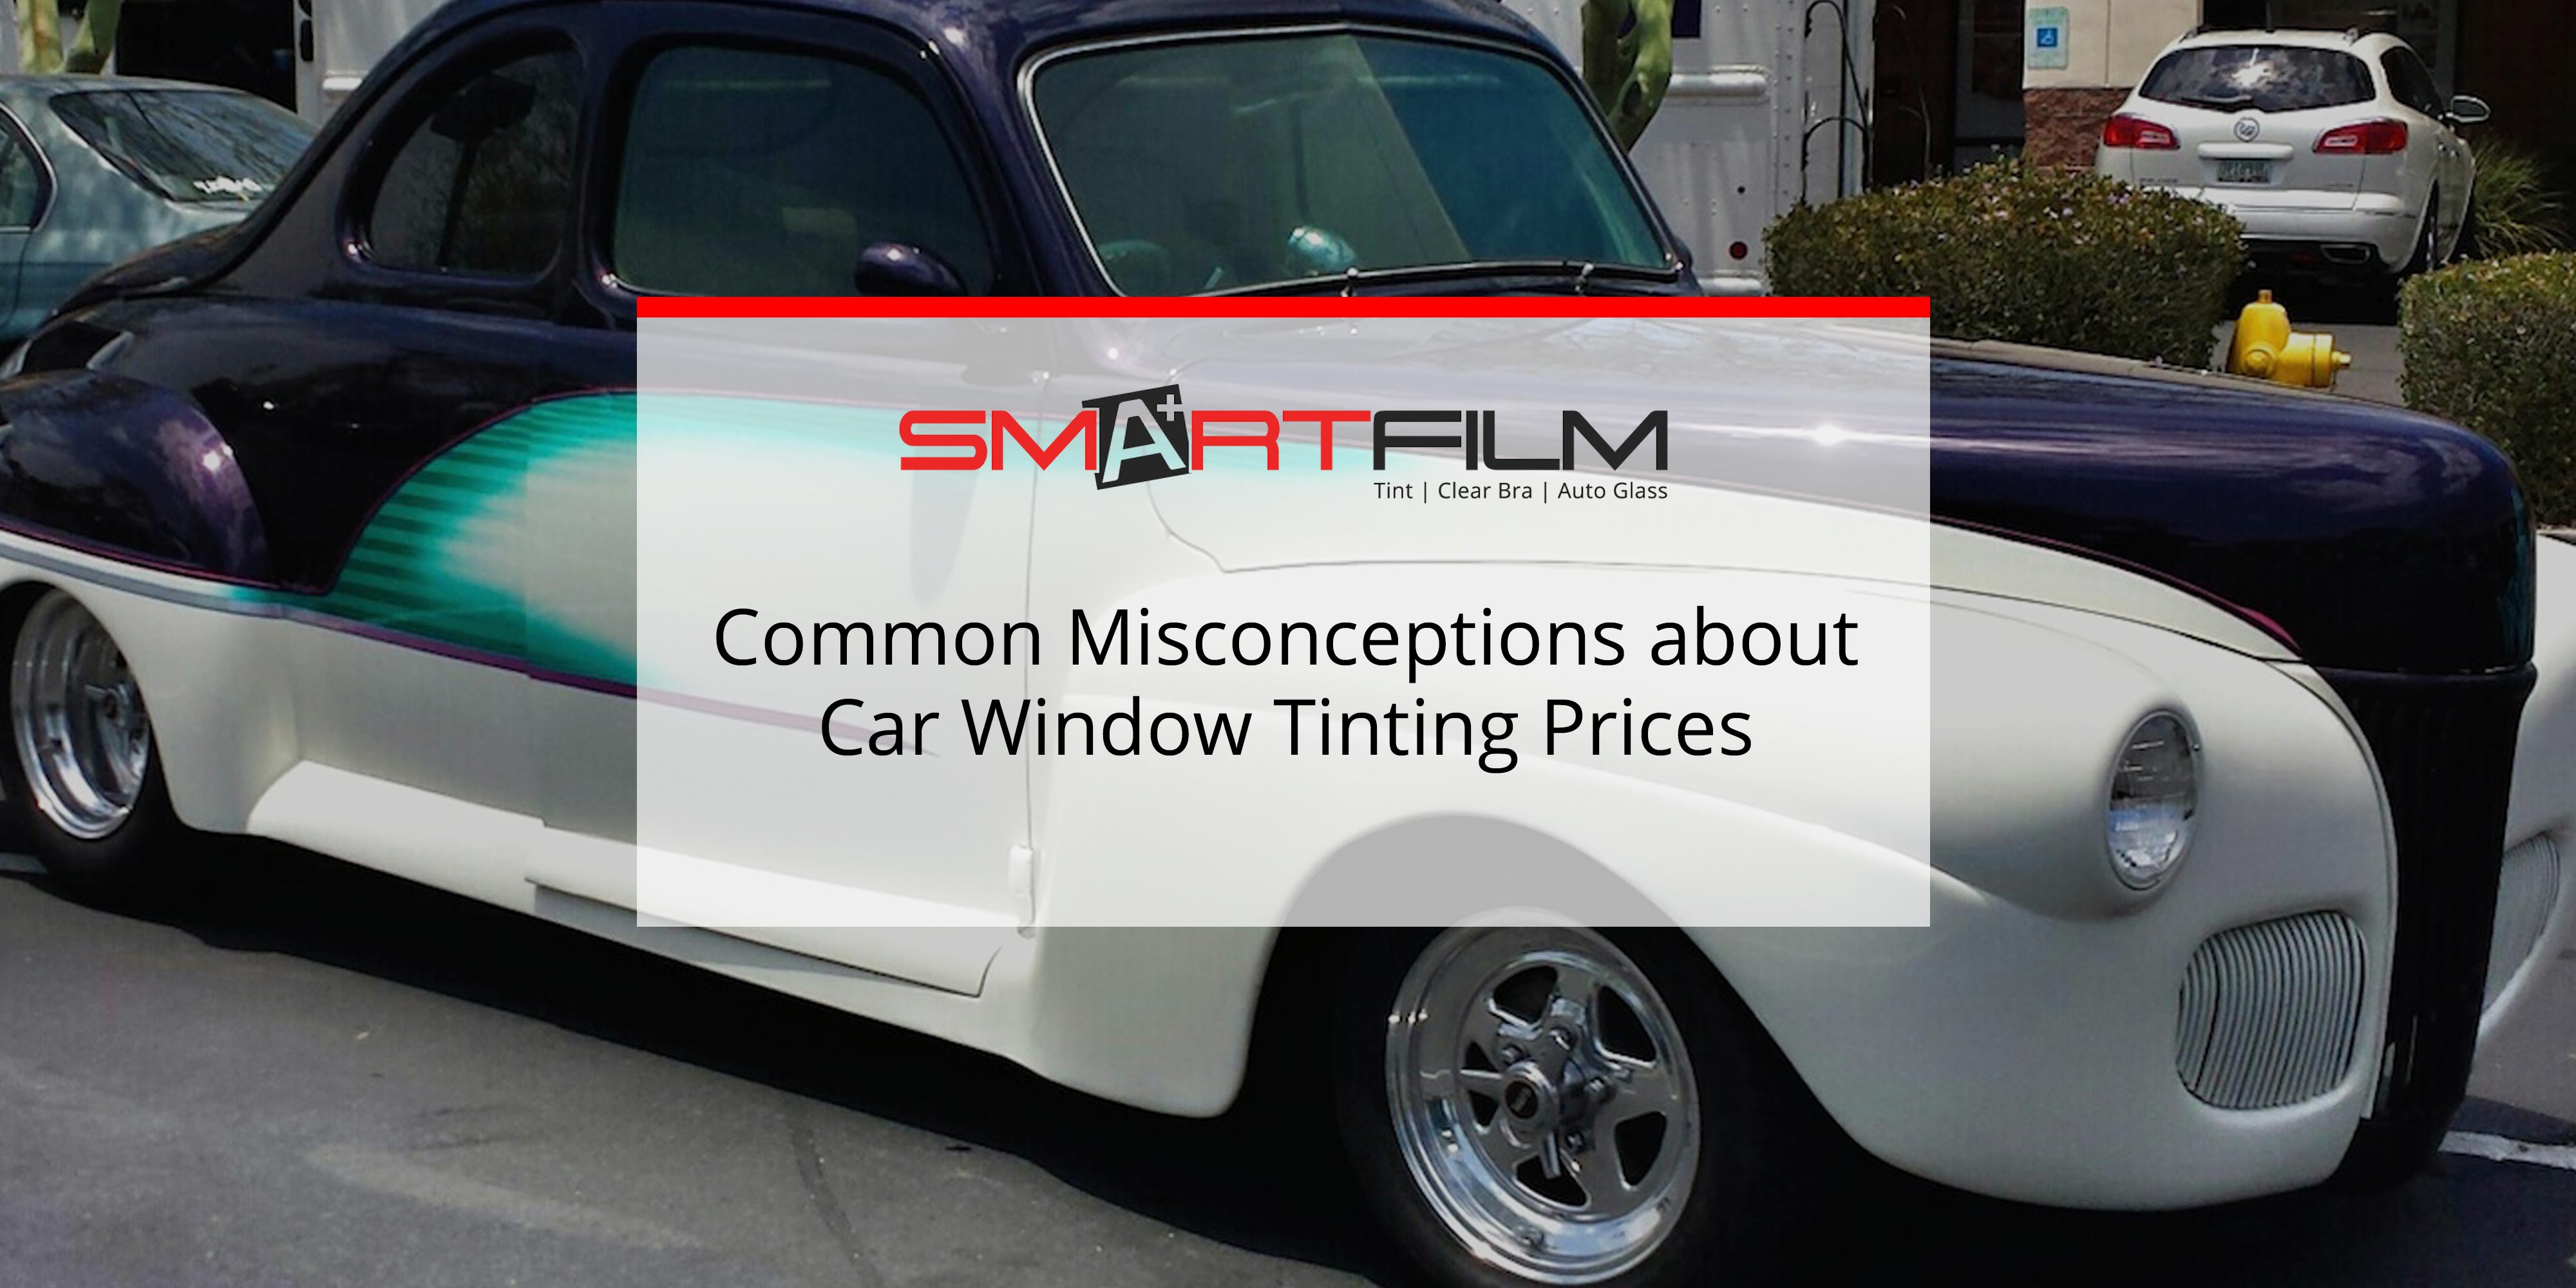 Airzona's Best Auto Glass Window Tinting